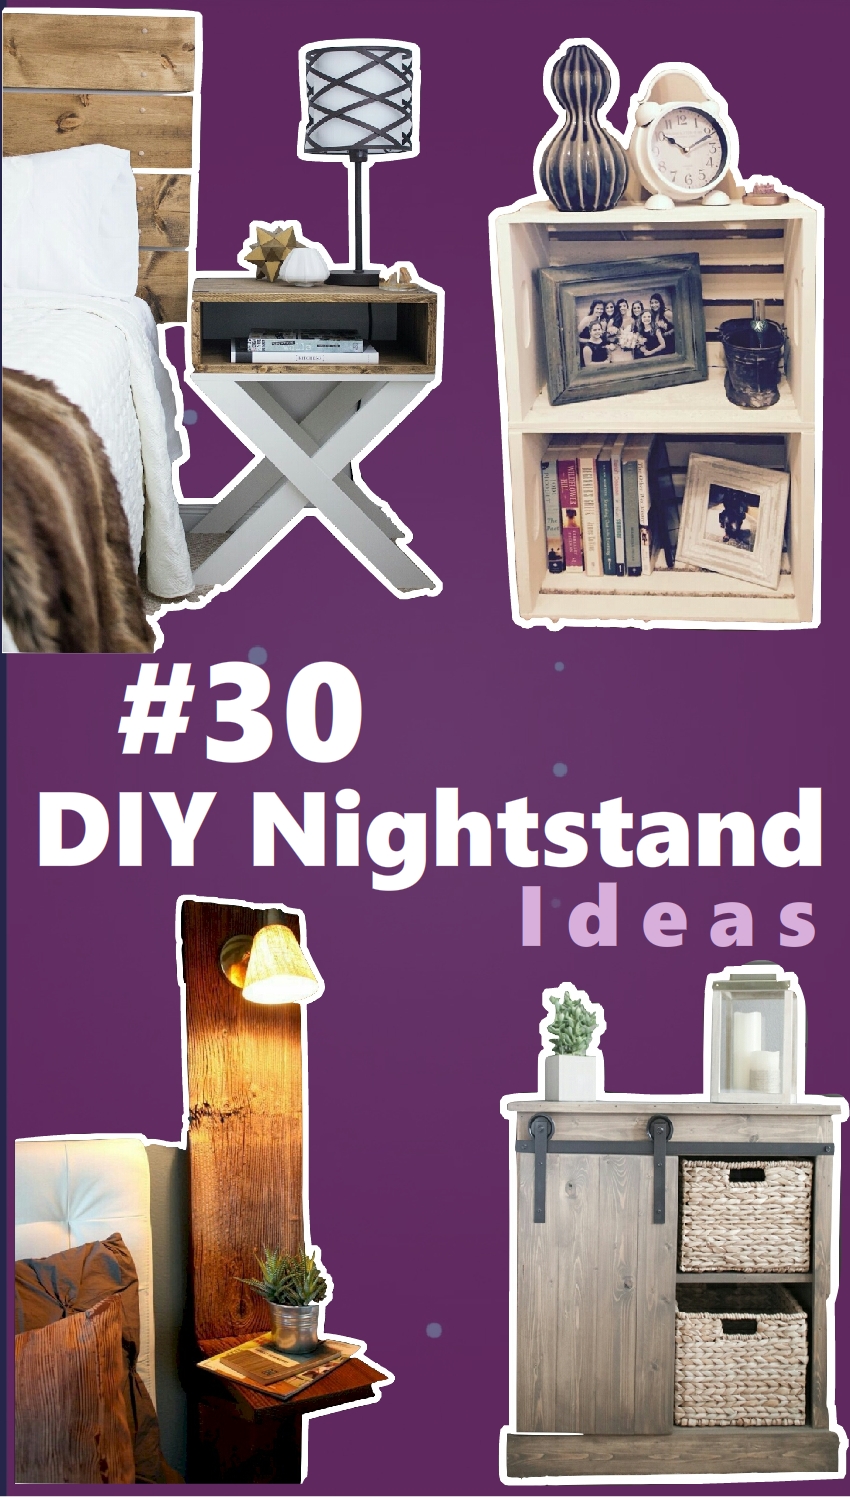 30 DIY Nightstand Ideas DIY Step by Step Pictures and Plans